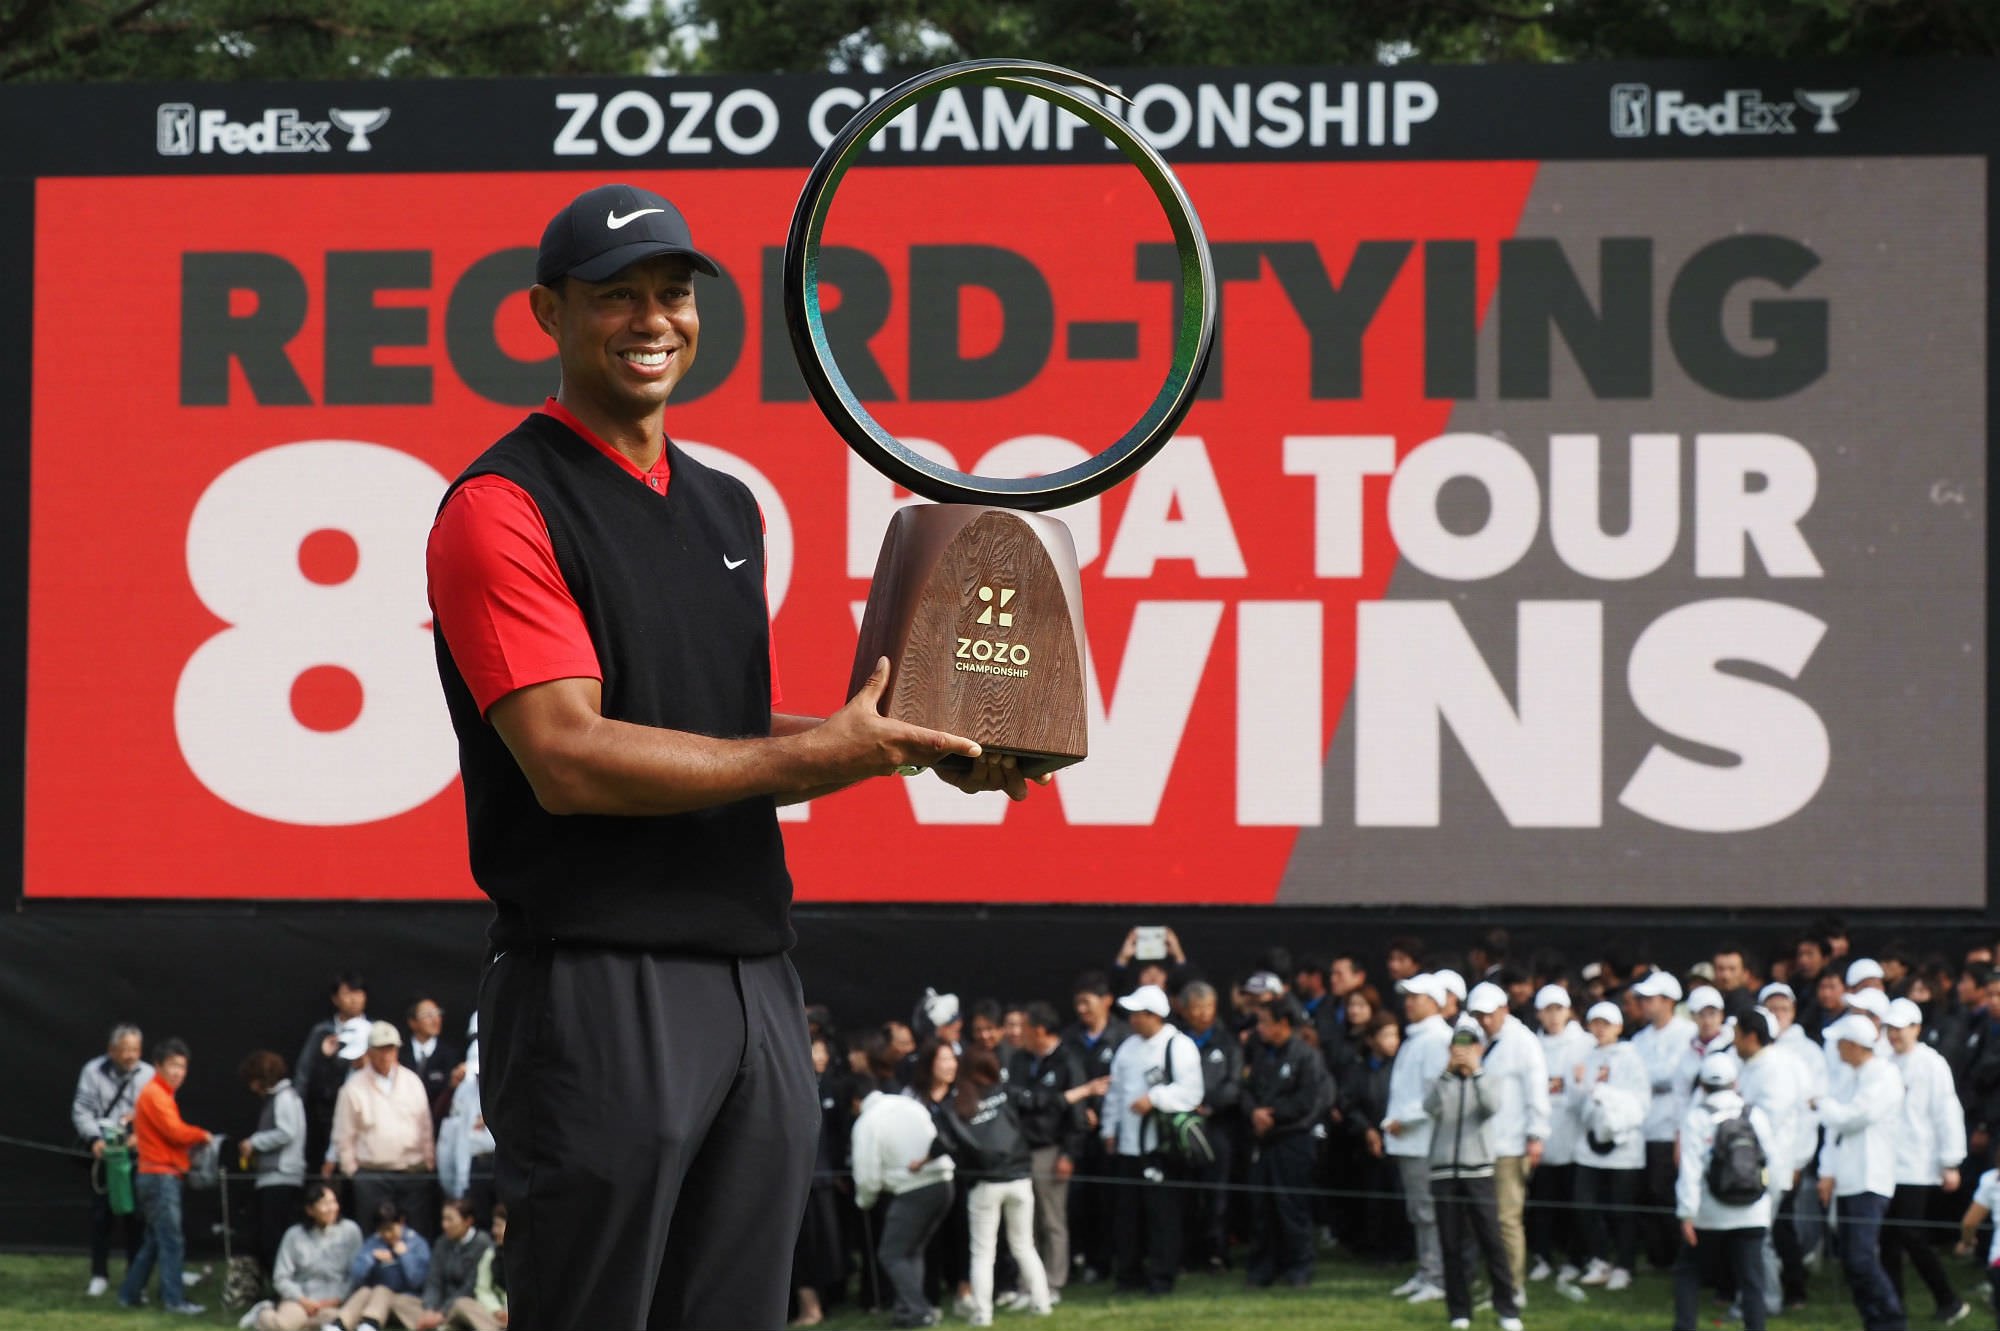 Tiger Woods Pga Tour Wins The Full List Of 82